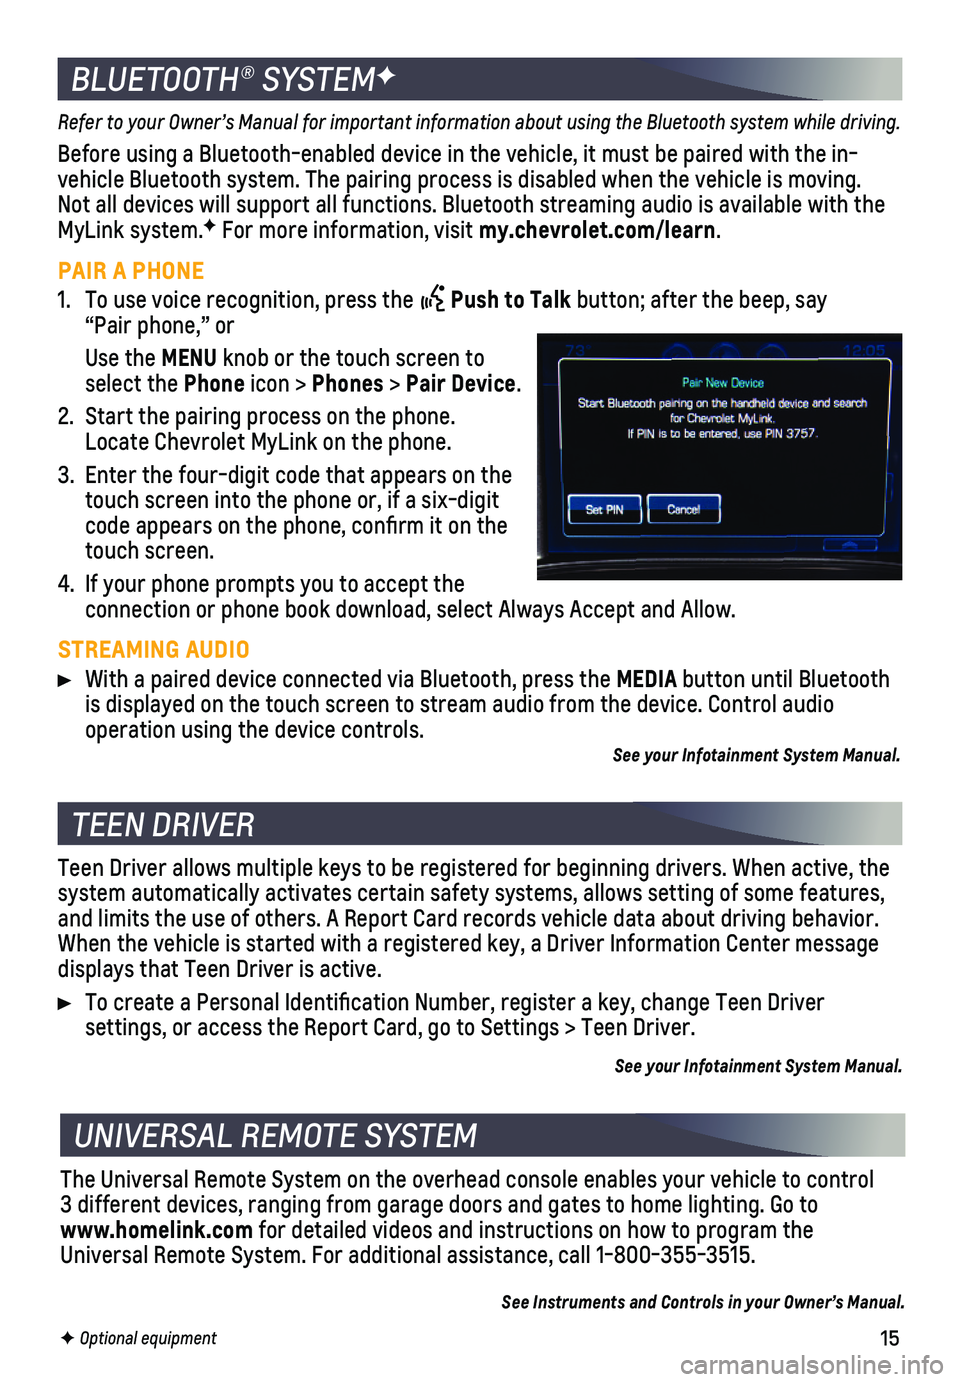 CHEVROLET SILVERADO 2018  Get To Know Guide 15
Refer to your Owner’s Manual for important information about using th\
e Bluetooth system while driving. 
Before using a Bluetooth-enabled device in the vehicle, it must be paire\
d with the in-